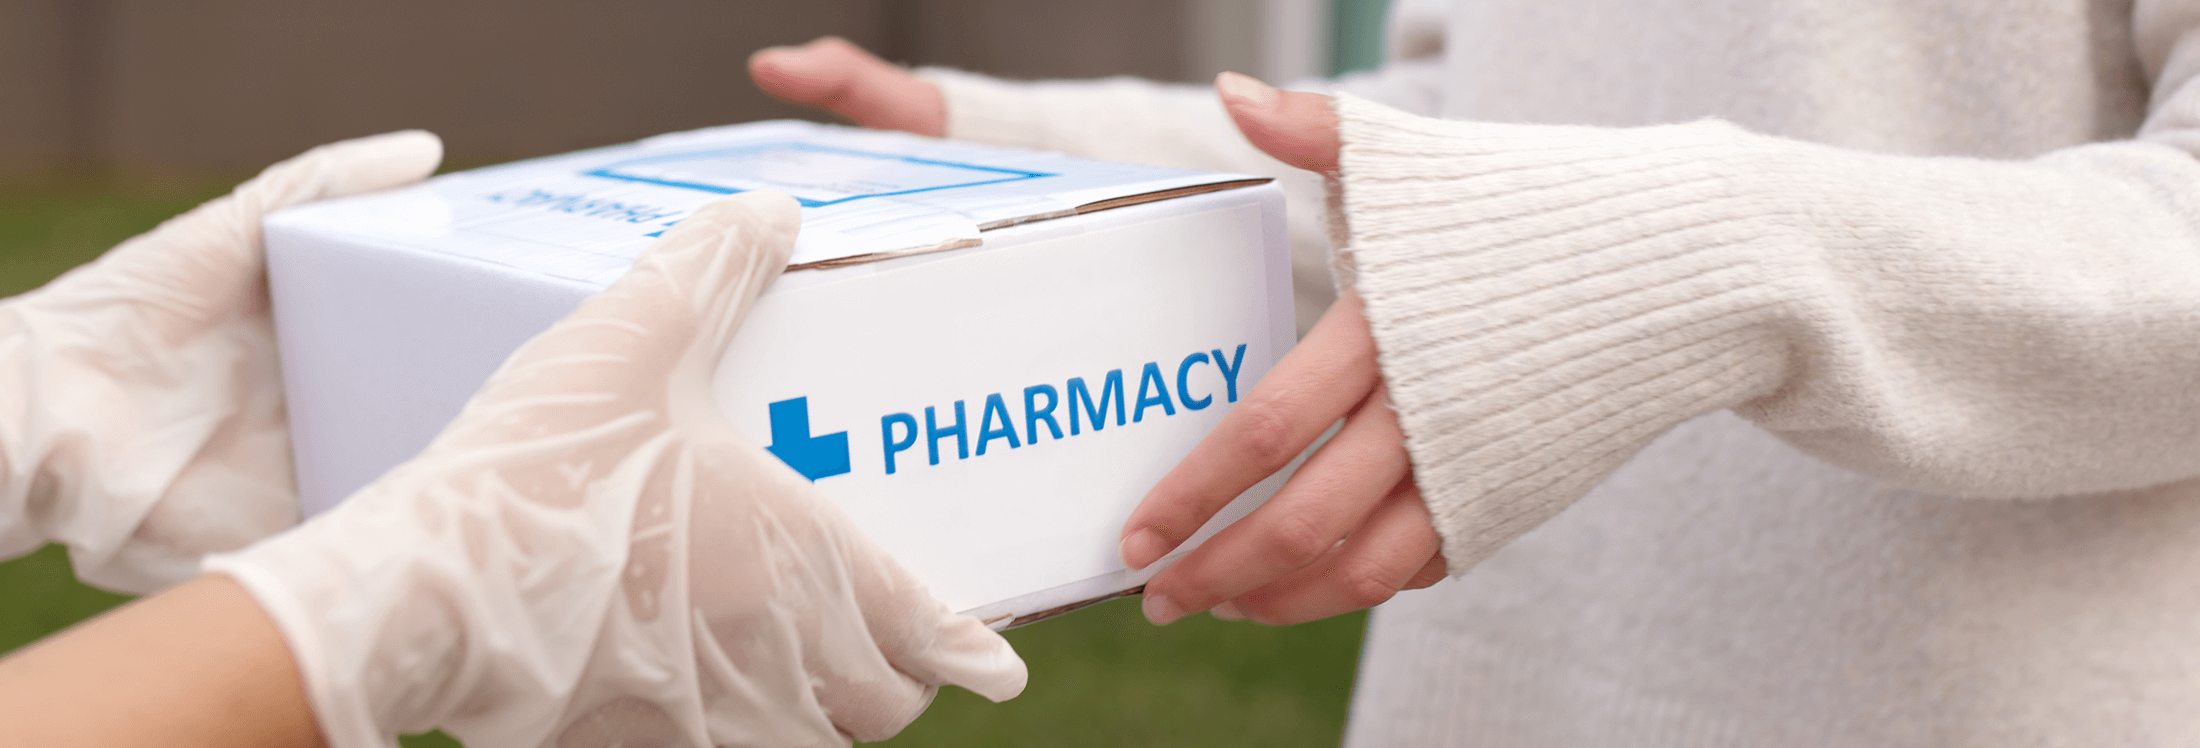 On Demand services with pharmacy package being delivered.